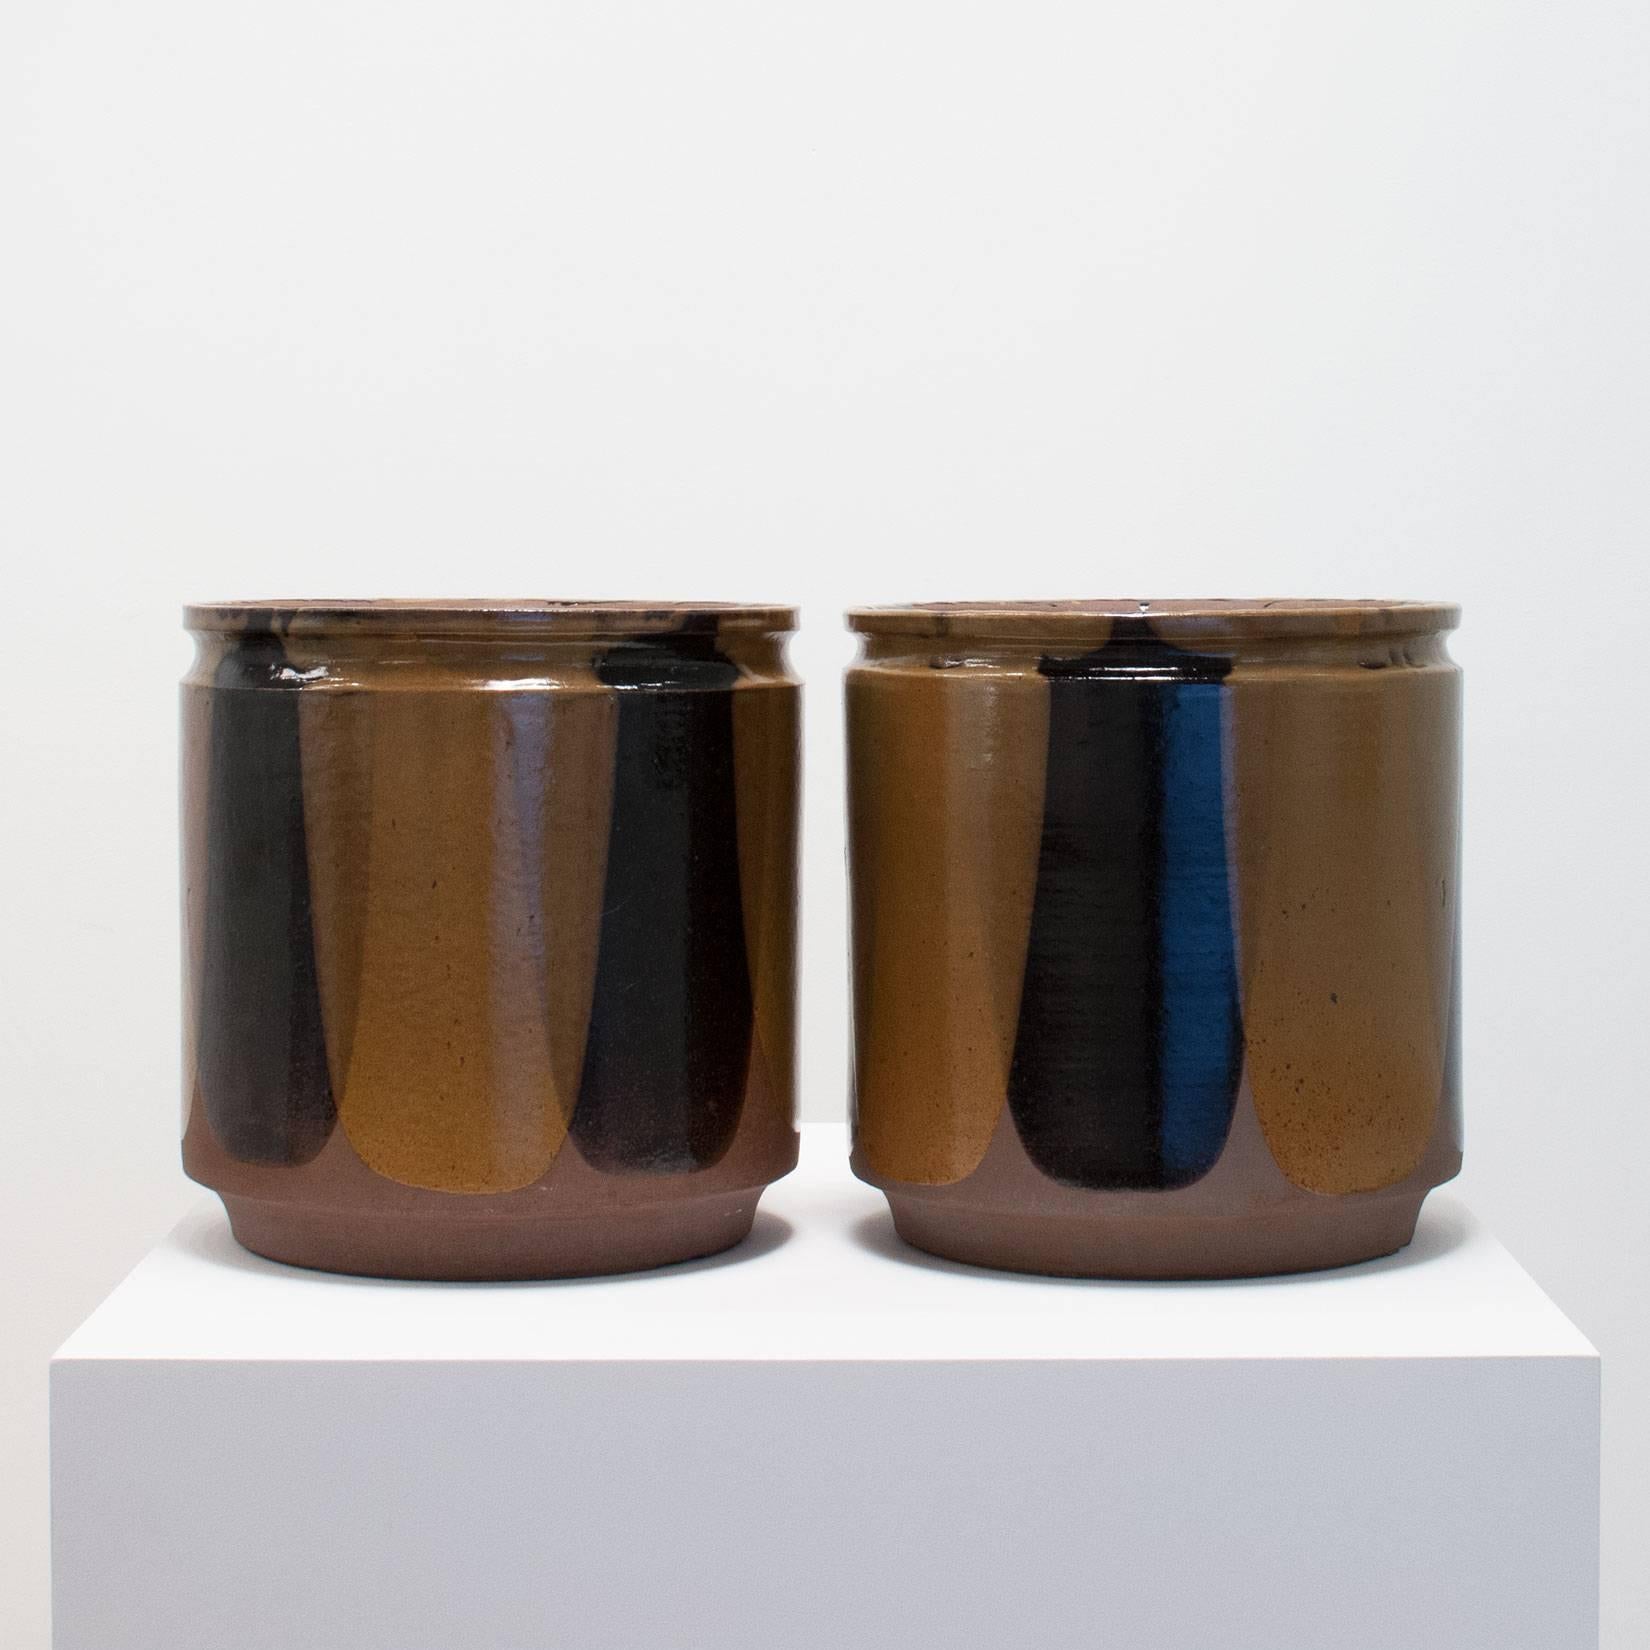 David Cressey and Robert Maxwell 'Flame' Glaze Design Ceramic Planters, 1970s For Sale 3